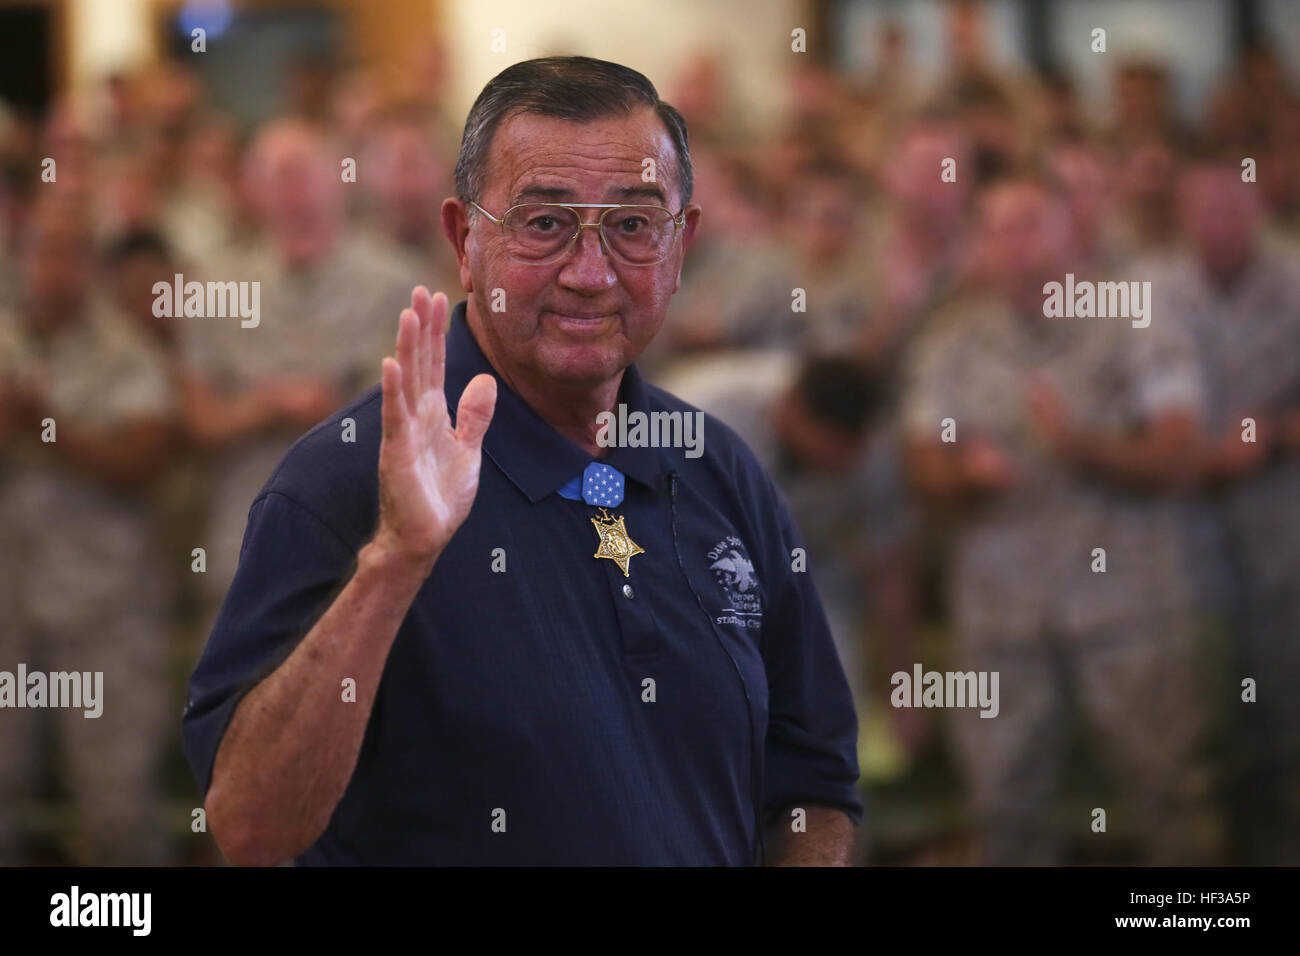 Col. Jay R. Vargas, a Congressional Medal of Honor recipient, waves at the camera after speaking to service members about the importance of finding help for those suffering from post-traumatic stress disorder May 12, 2015, at the Chaplain Joseph W. Estabrook Chapel aboard Marine Corps Base Hawaii. (U.S. Marine Corps photo by Lance Cpl. Harley Thomas/Released) Medal of Honor recipient implores, Let it out 150512-M-SB674-508 Stock Photo